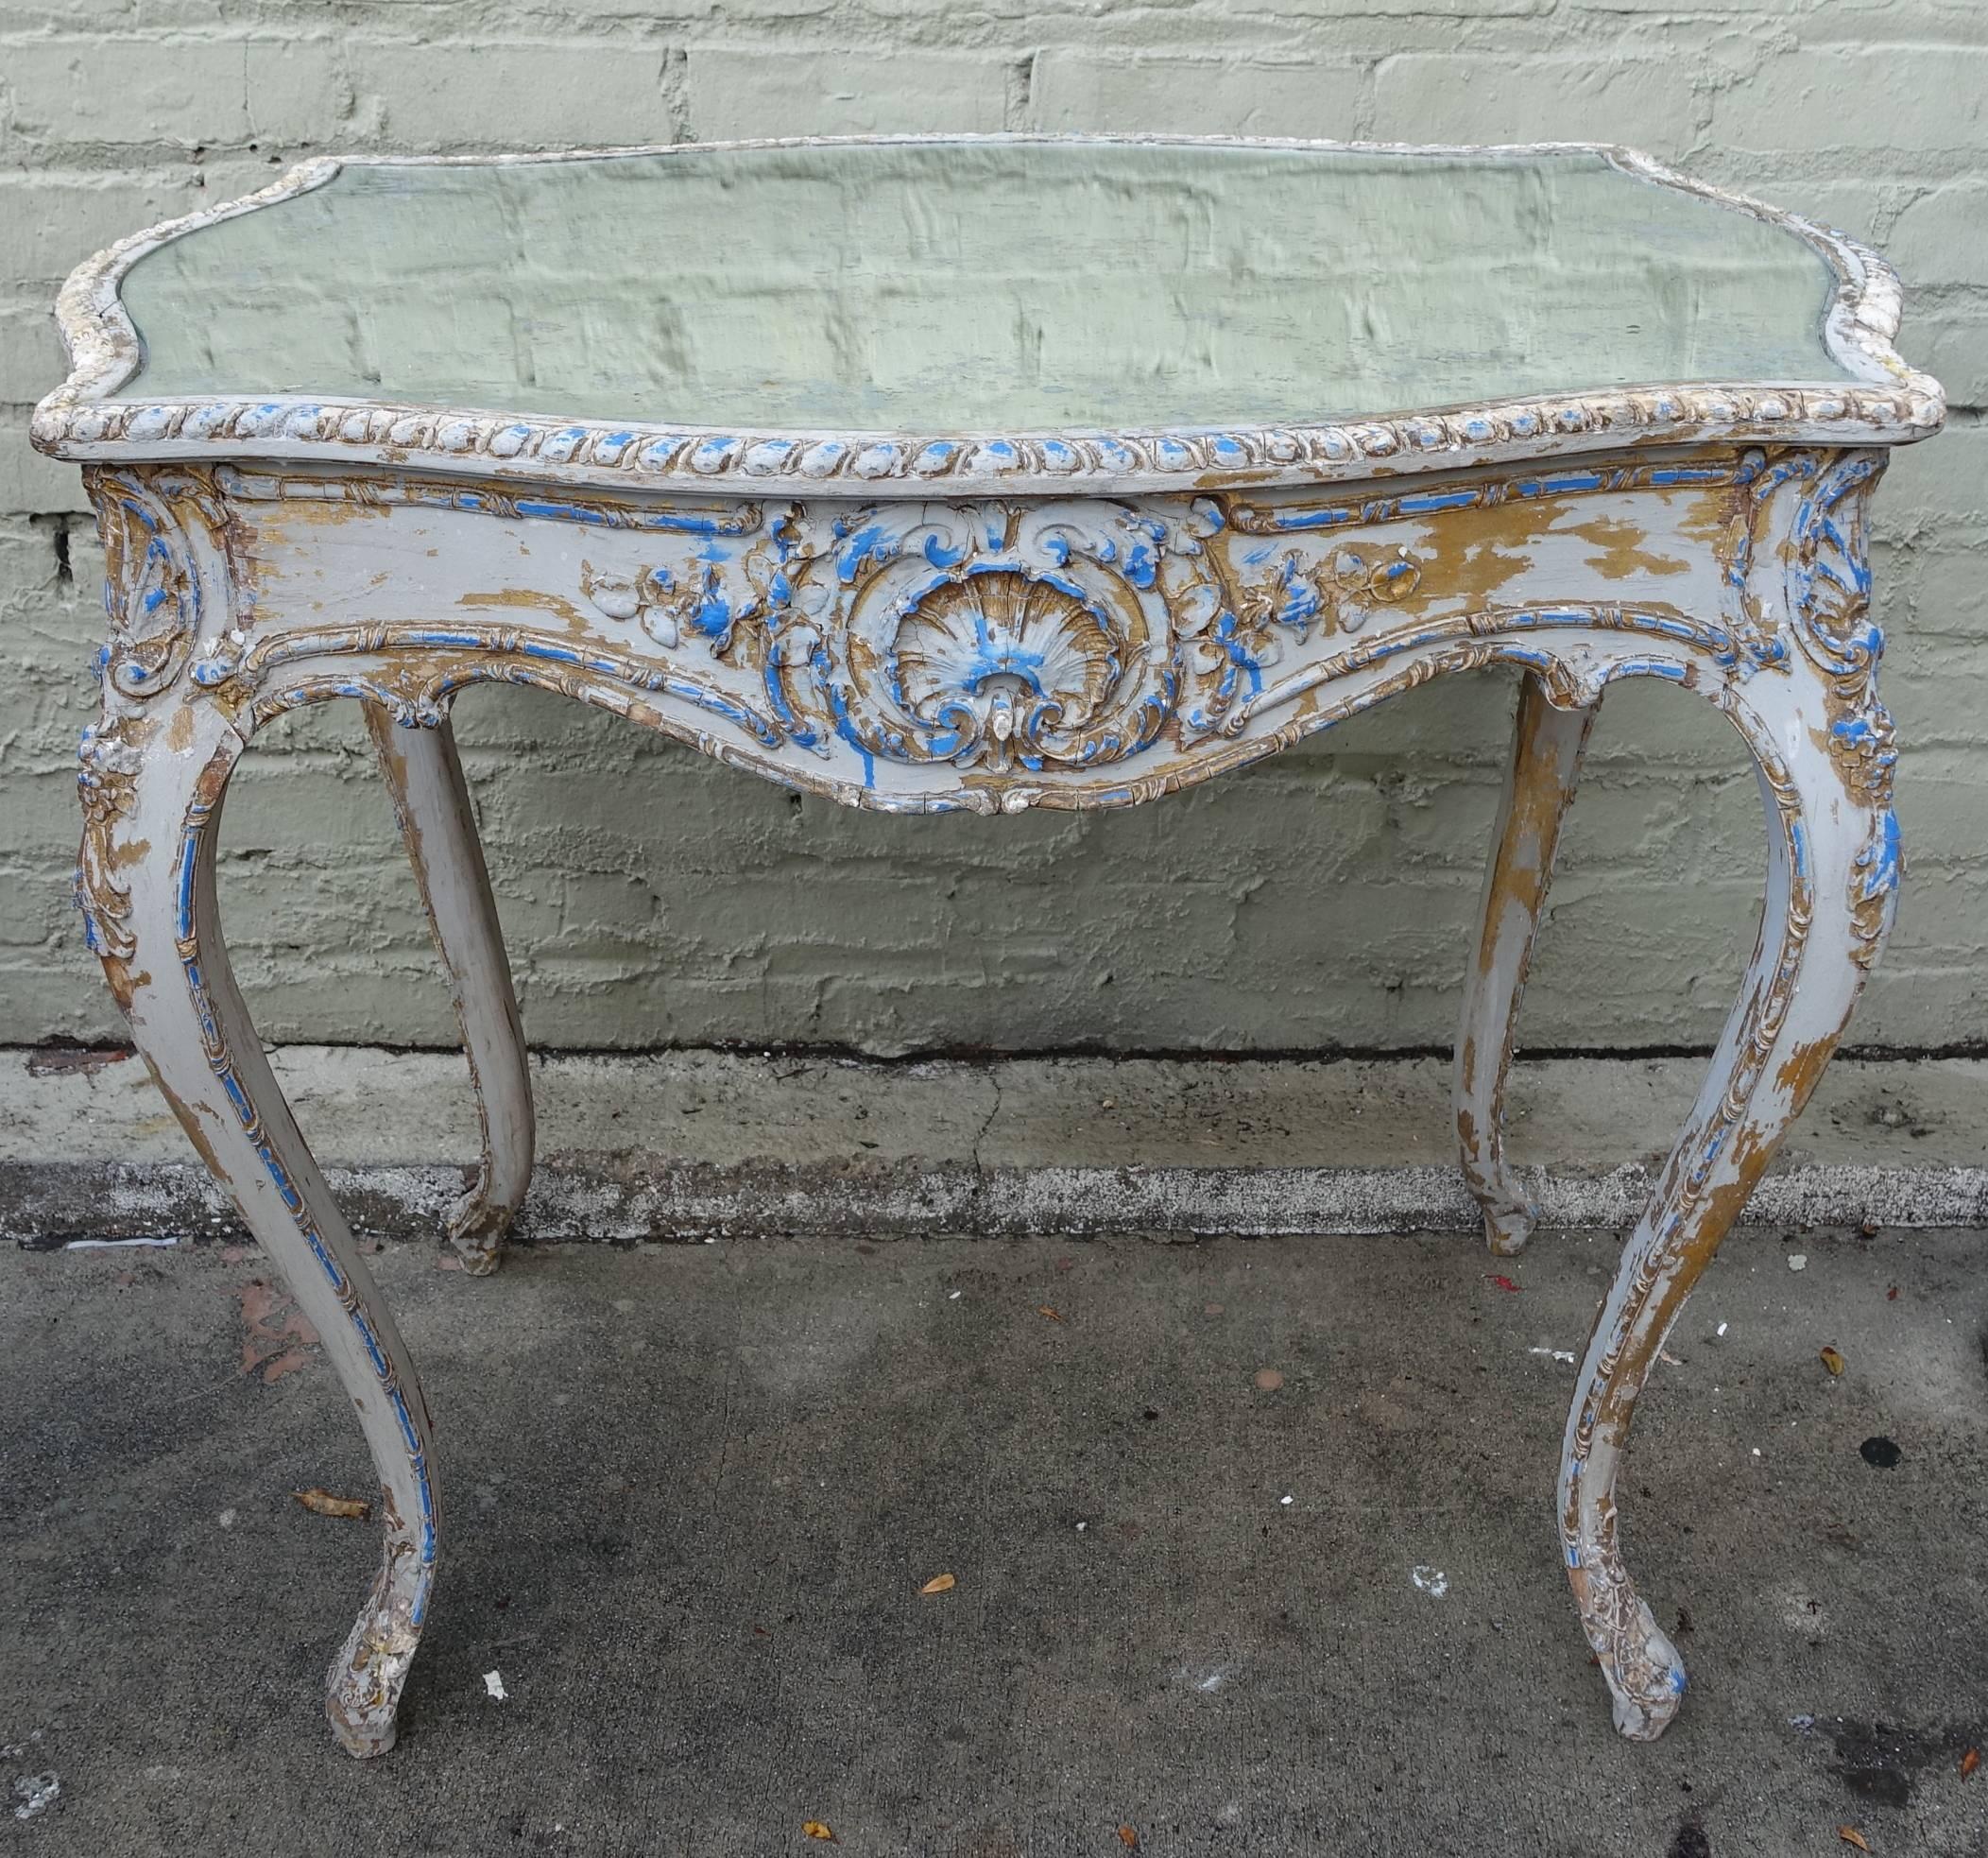 19th century French painted Louis XV style table standing on four cabriole legs. Carved center cartouche on the apron of the table. Antique mirrored top.